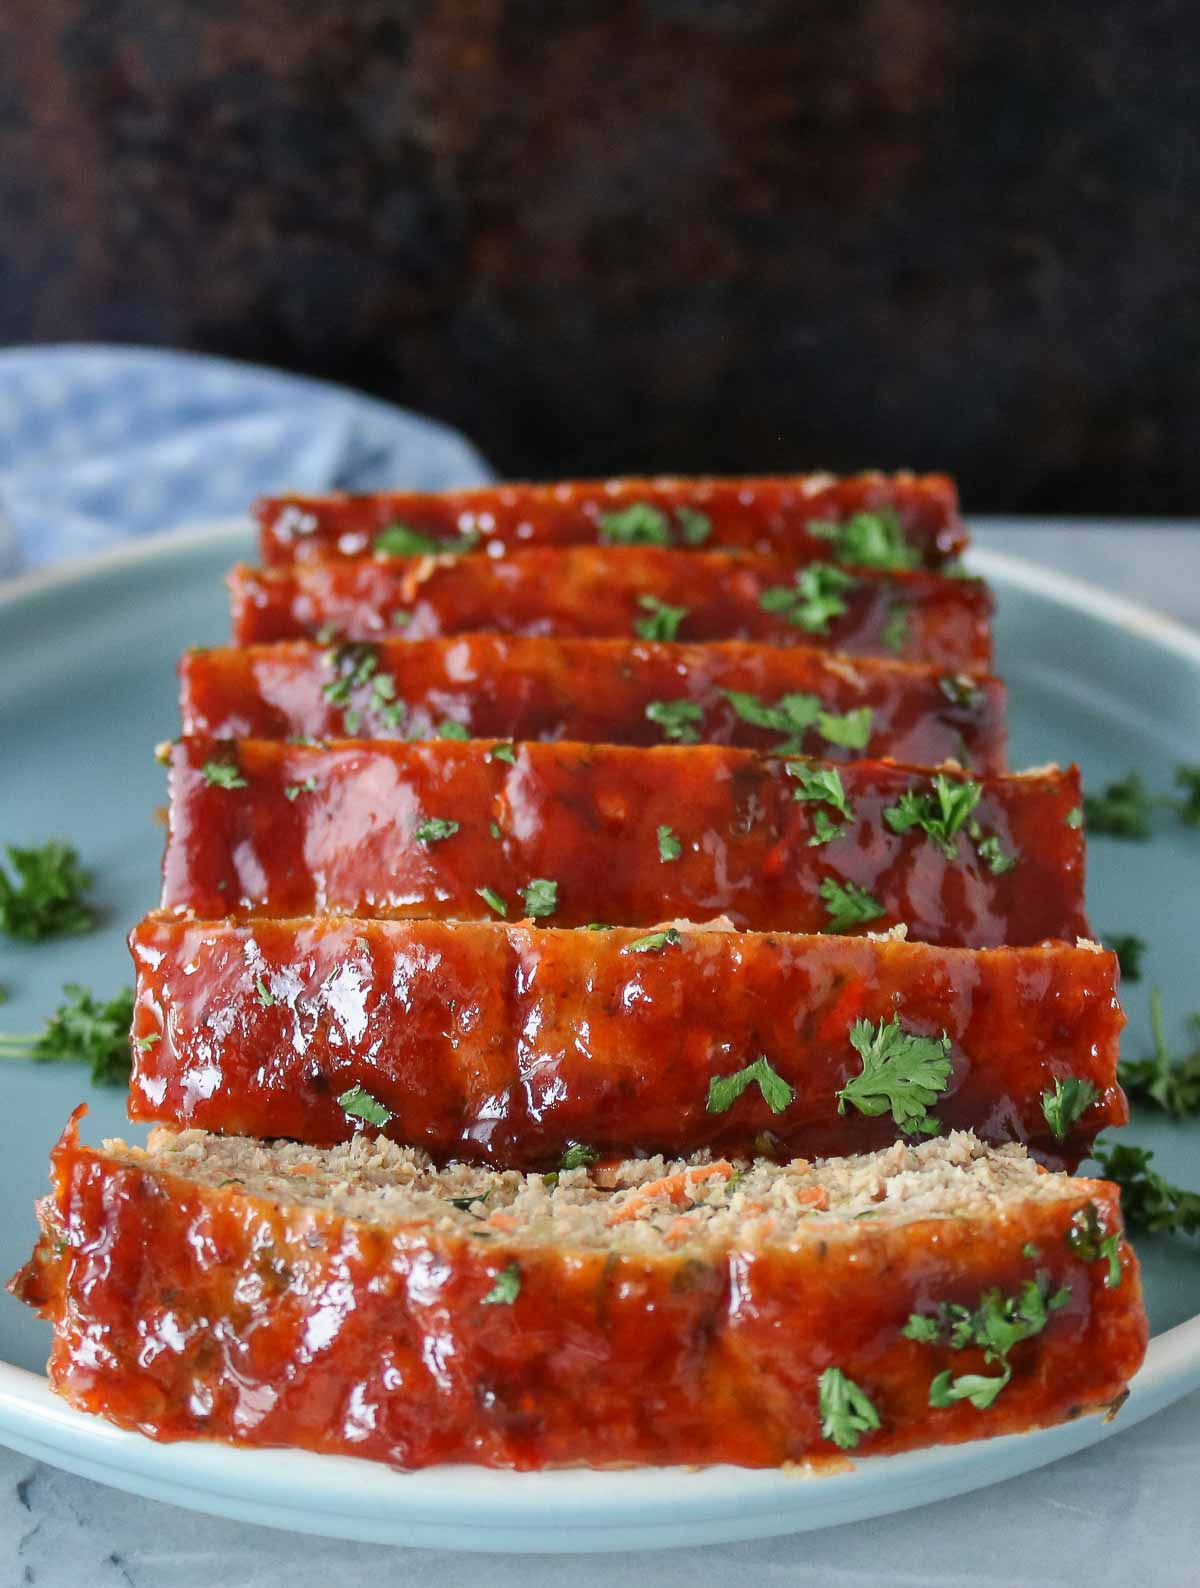 Sliced ground chicken meatloaf on a plate, showing the sauce-covered top.